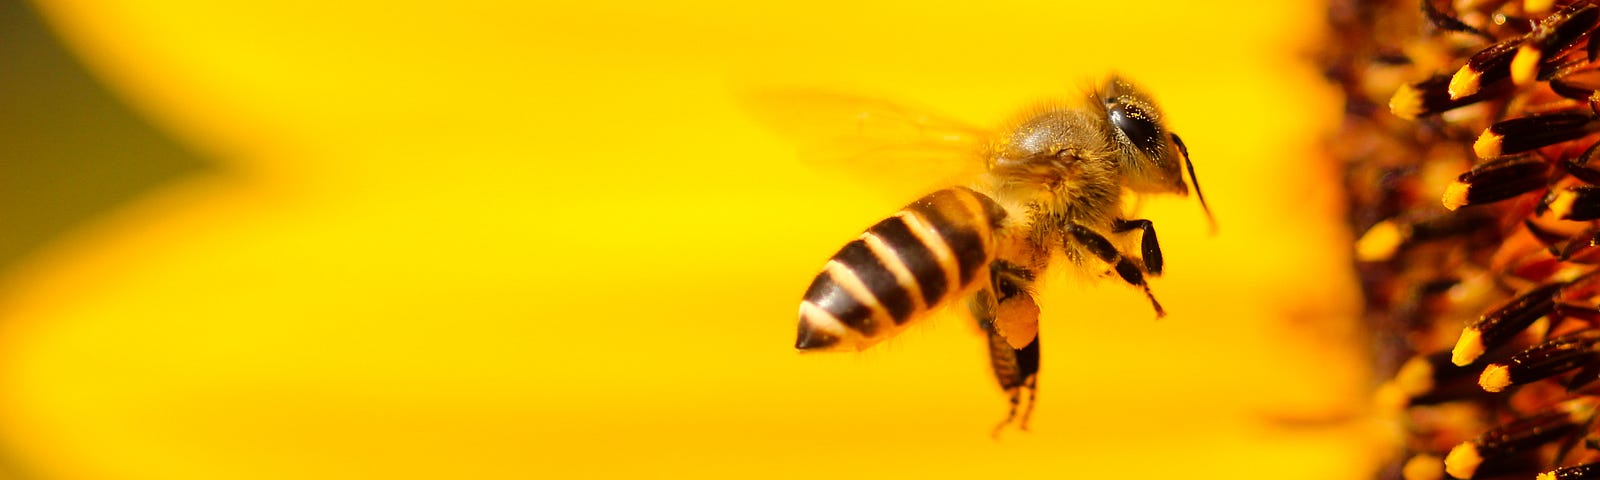 A bee (not a fish, except legally speaking) flying in front of a flower